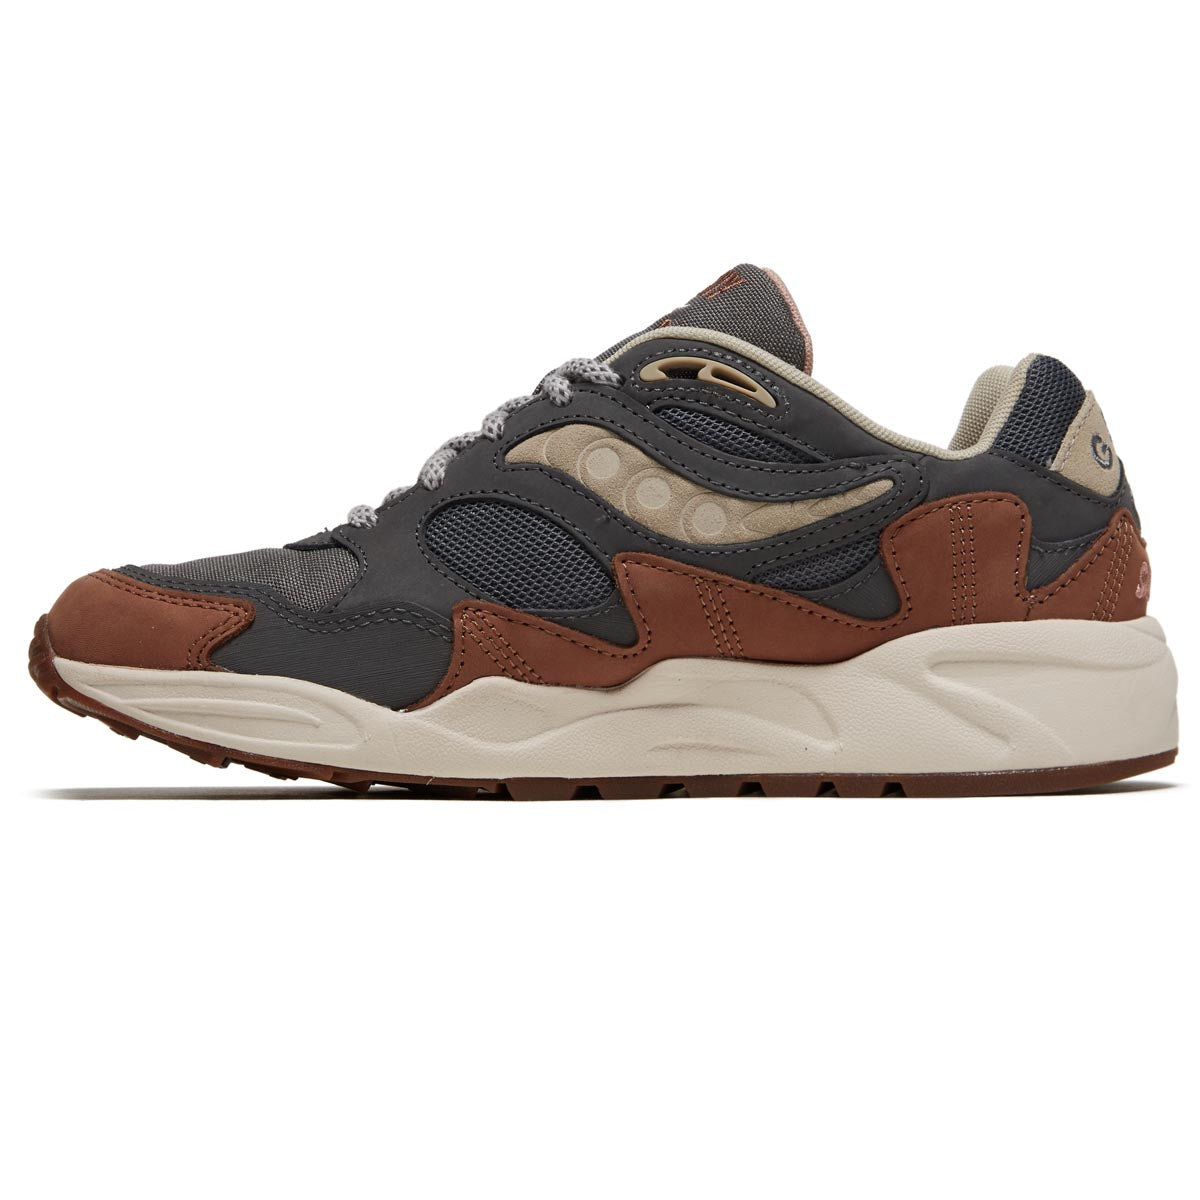 Saucony Grid Shadow 2 Shoes - Grey/Brown image 2